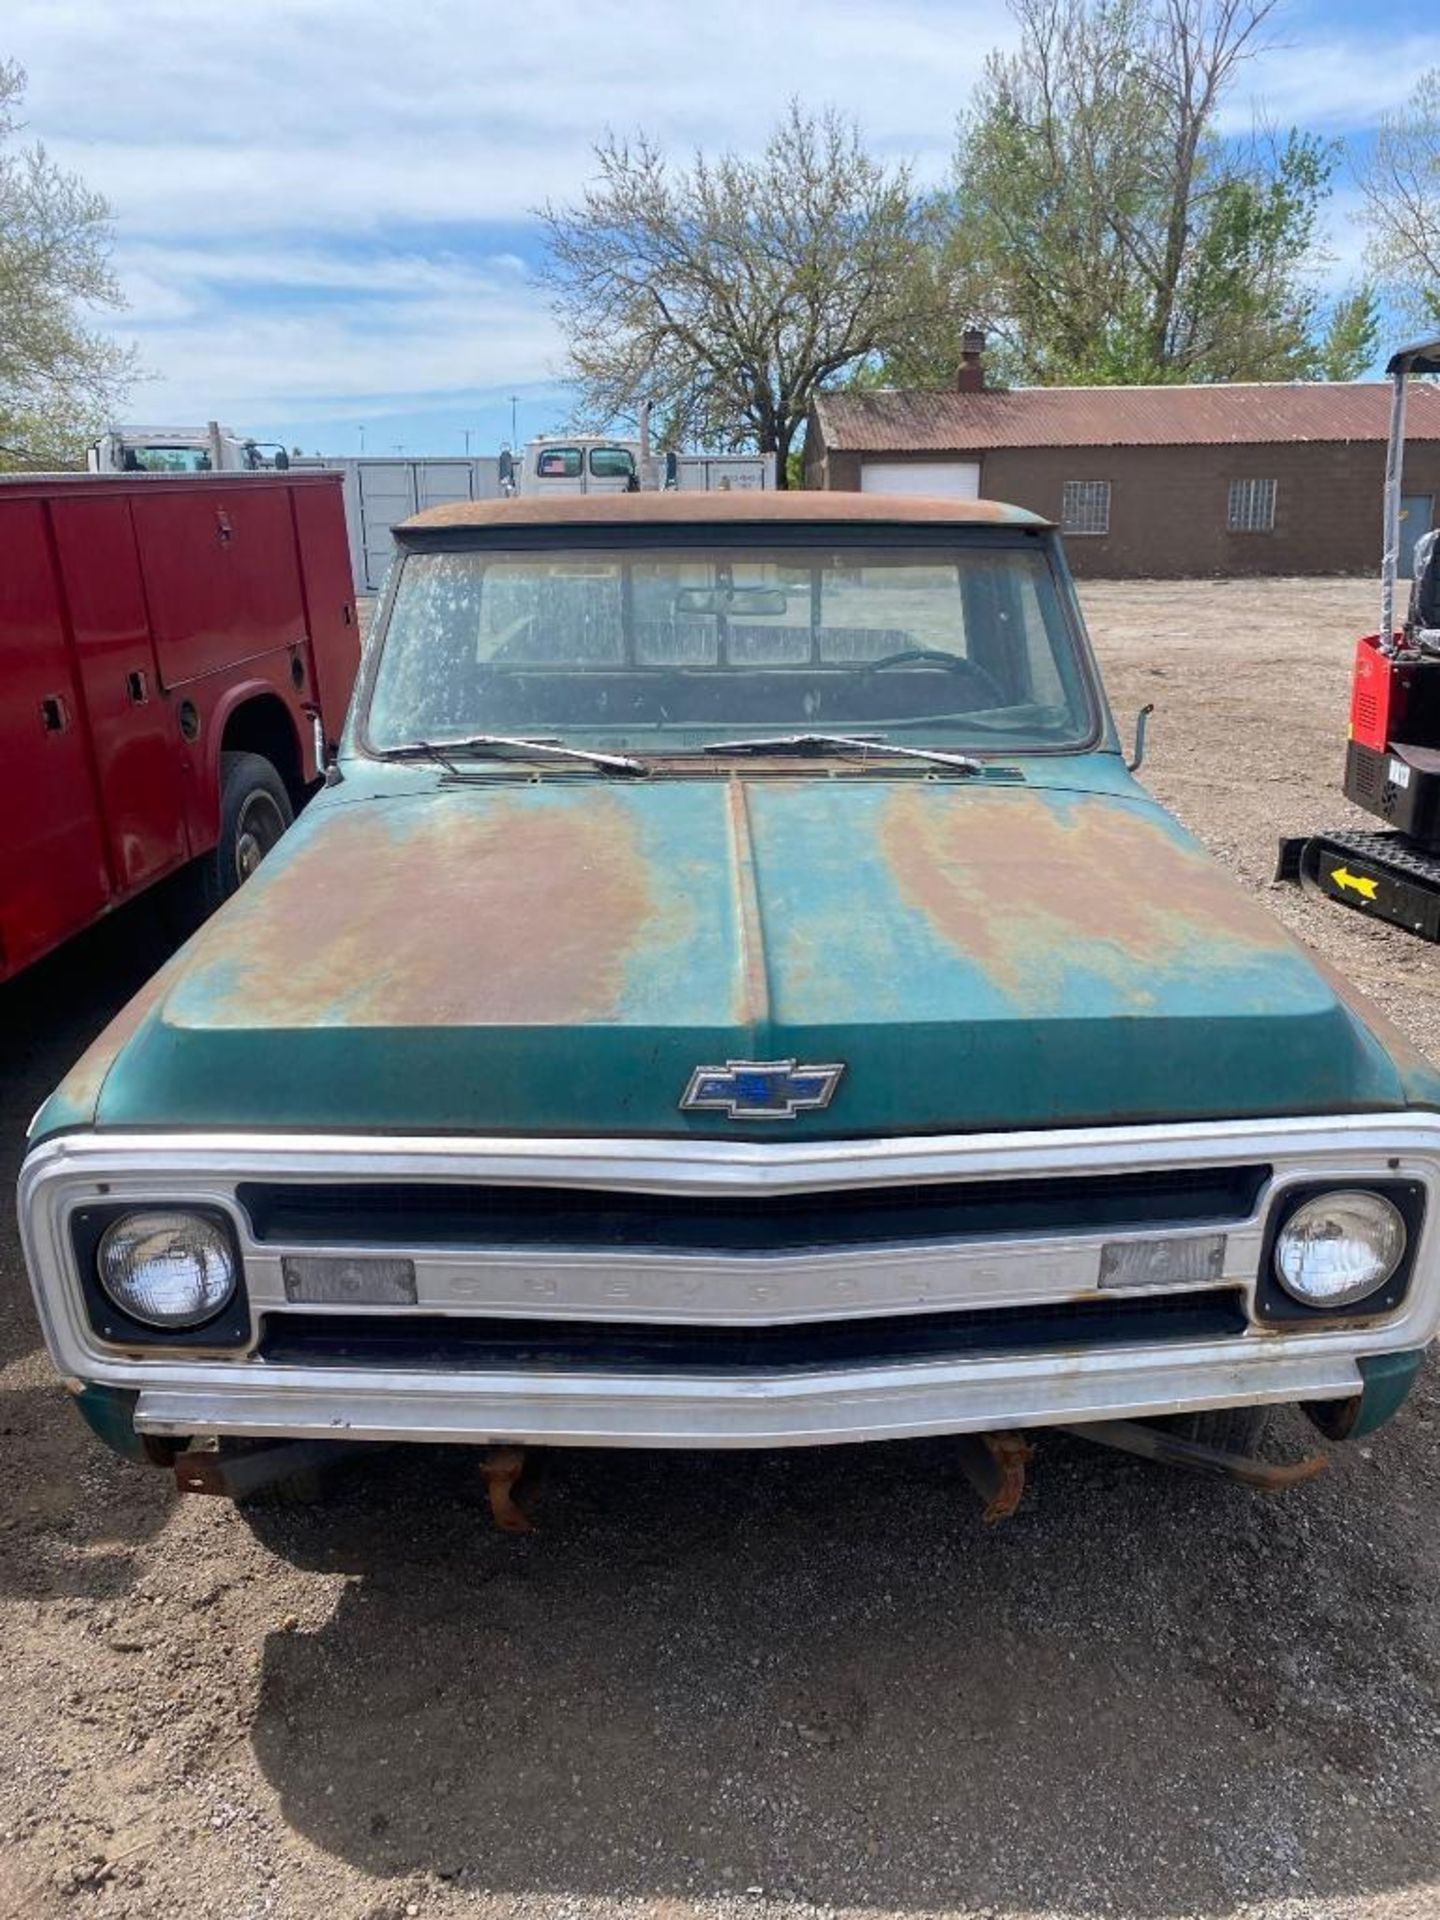 1970 C/10 Pickup Truck (for parts) - Image 2 of 10